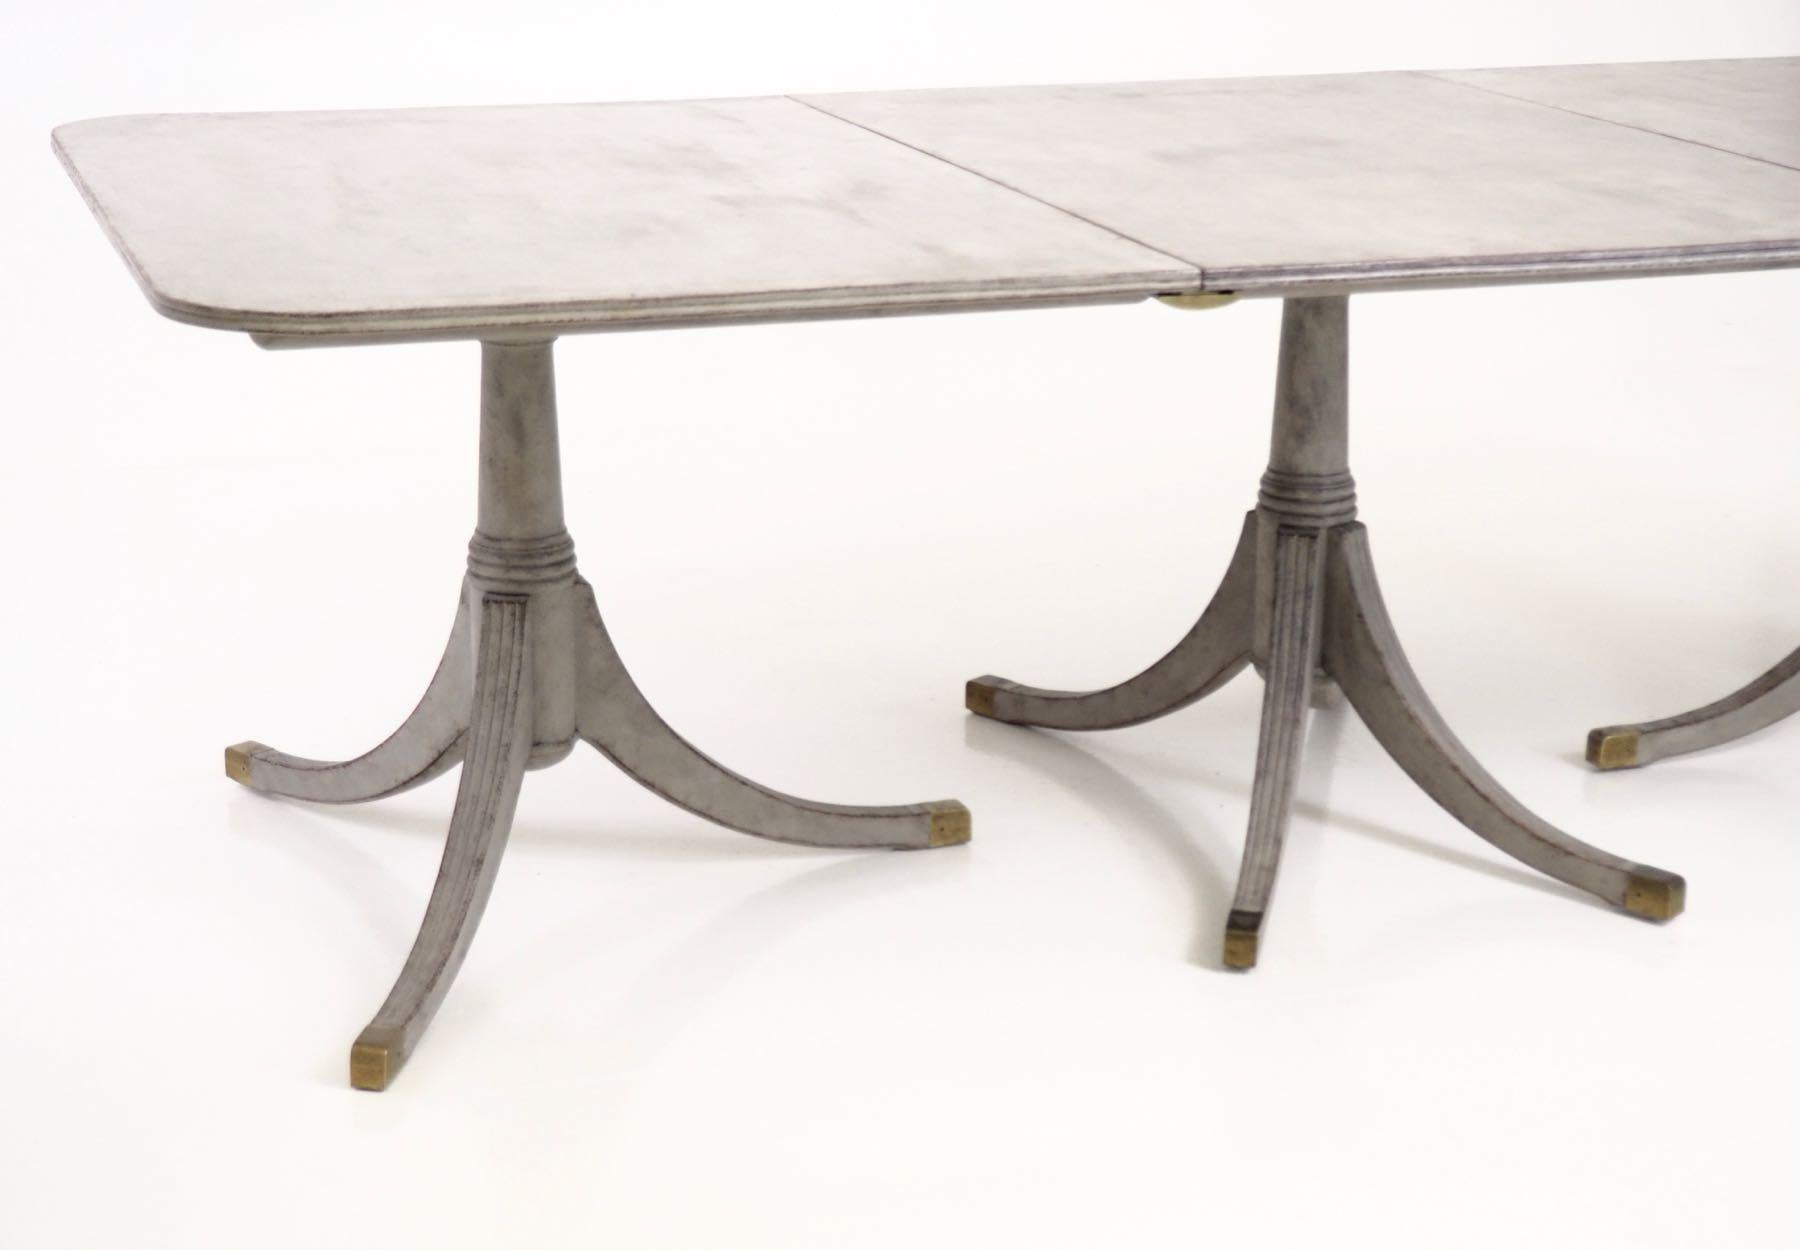 19th Century Outstanding European Three-Pillar Table, with Two Extra Leaves, Late 19 Century